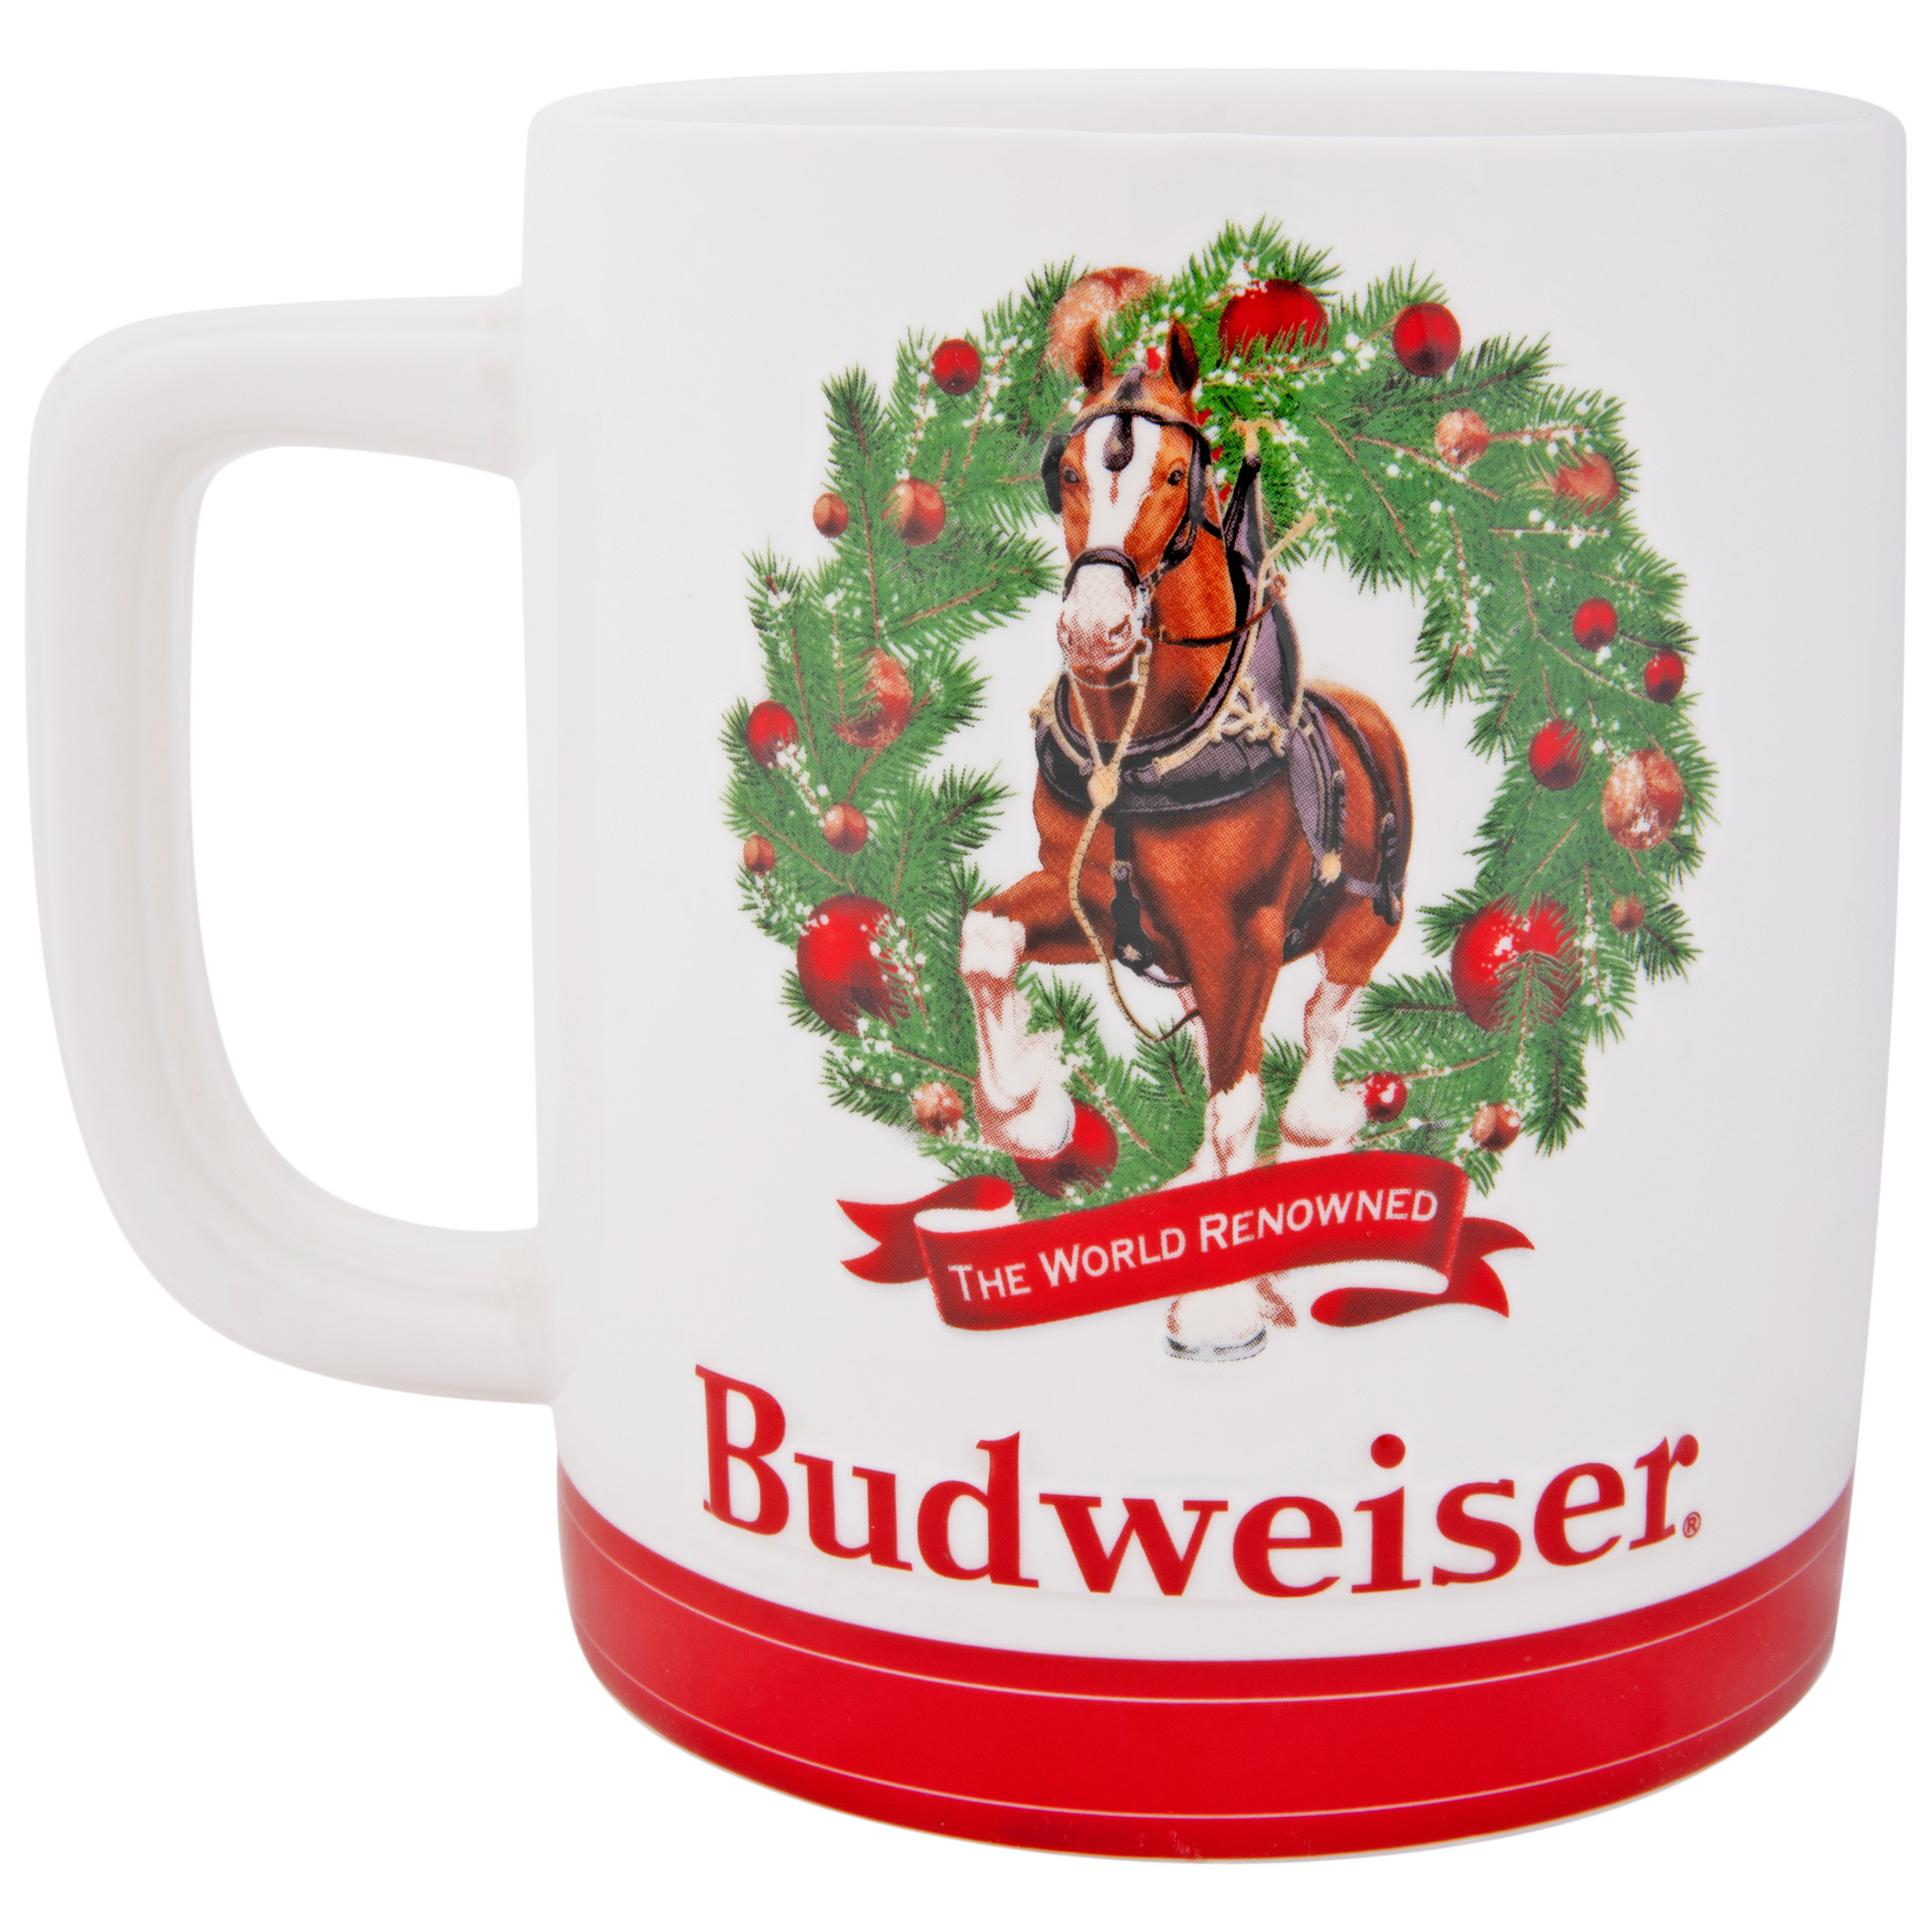 Budweiser Clydesdales The World-Renowned Holiday Stein Mug